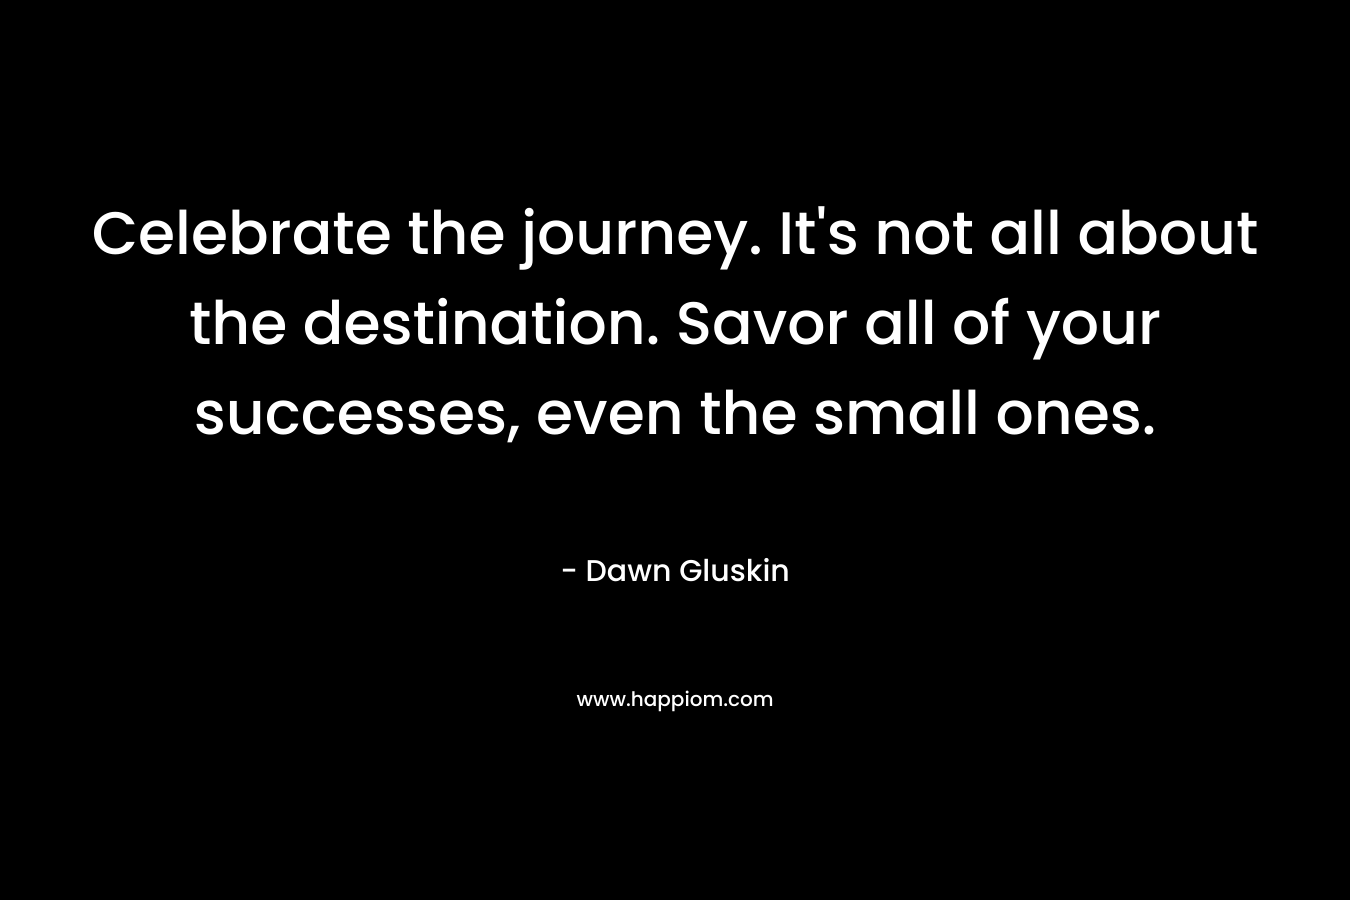 Celebrate the journey. It’s not all about the destination. Savor all of your successes, even the small ones. – Dawn Gluskin